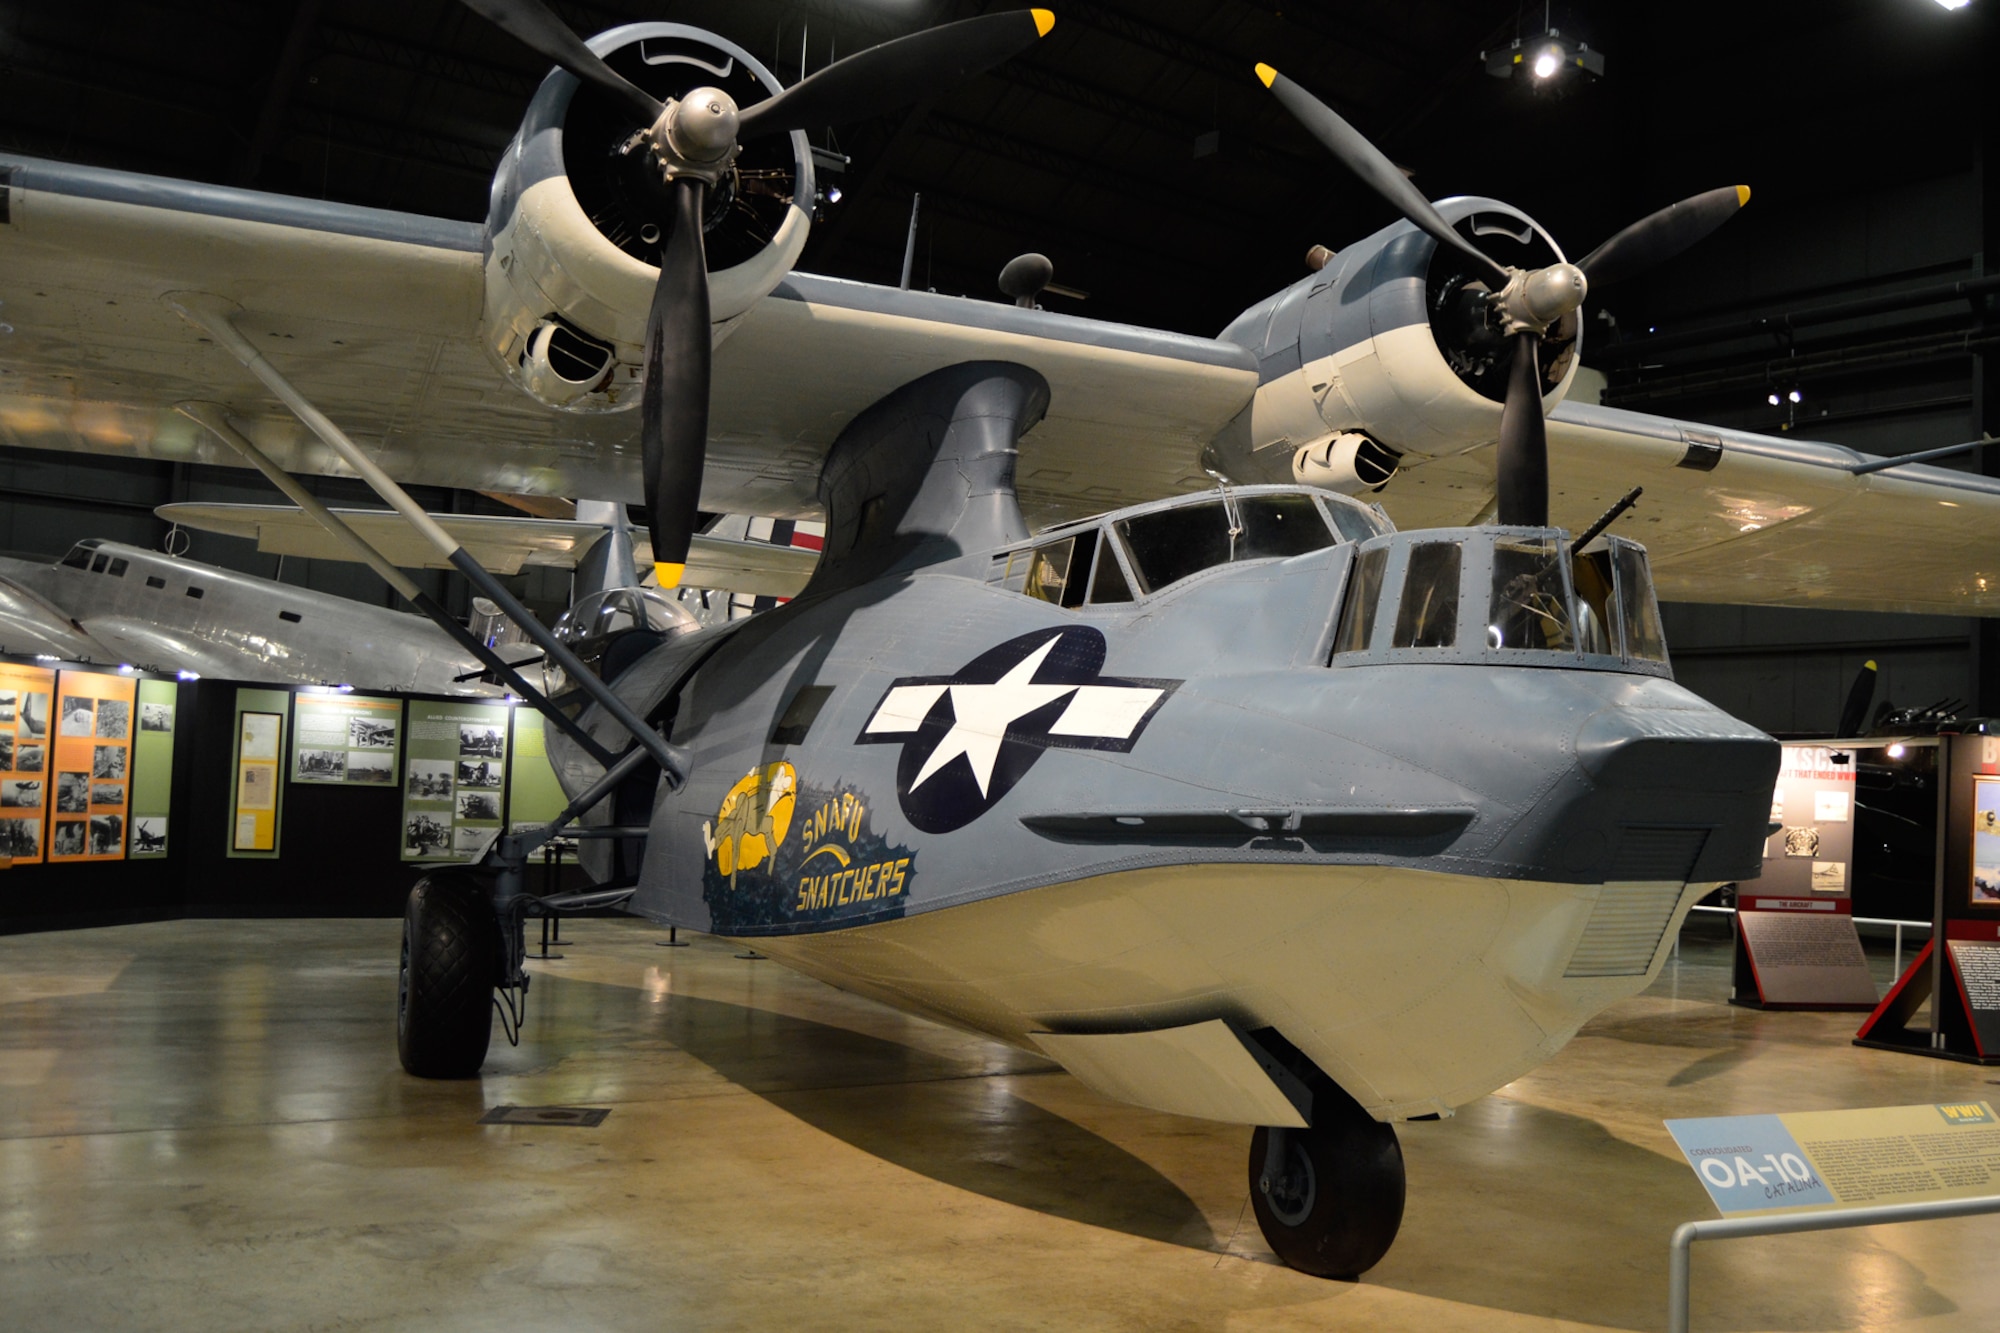 DAYTON, Ohio -- Consolidated OA-10 Catalina in the World War II Gallery at the National Museum of the United States Air Force. (U.S. Air Force photo)